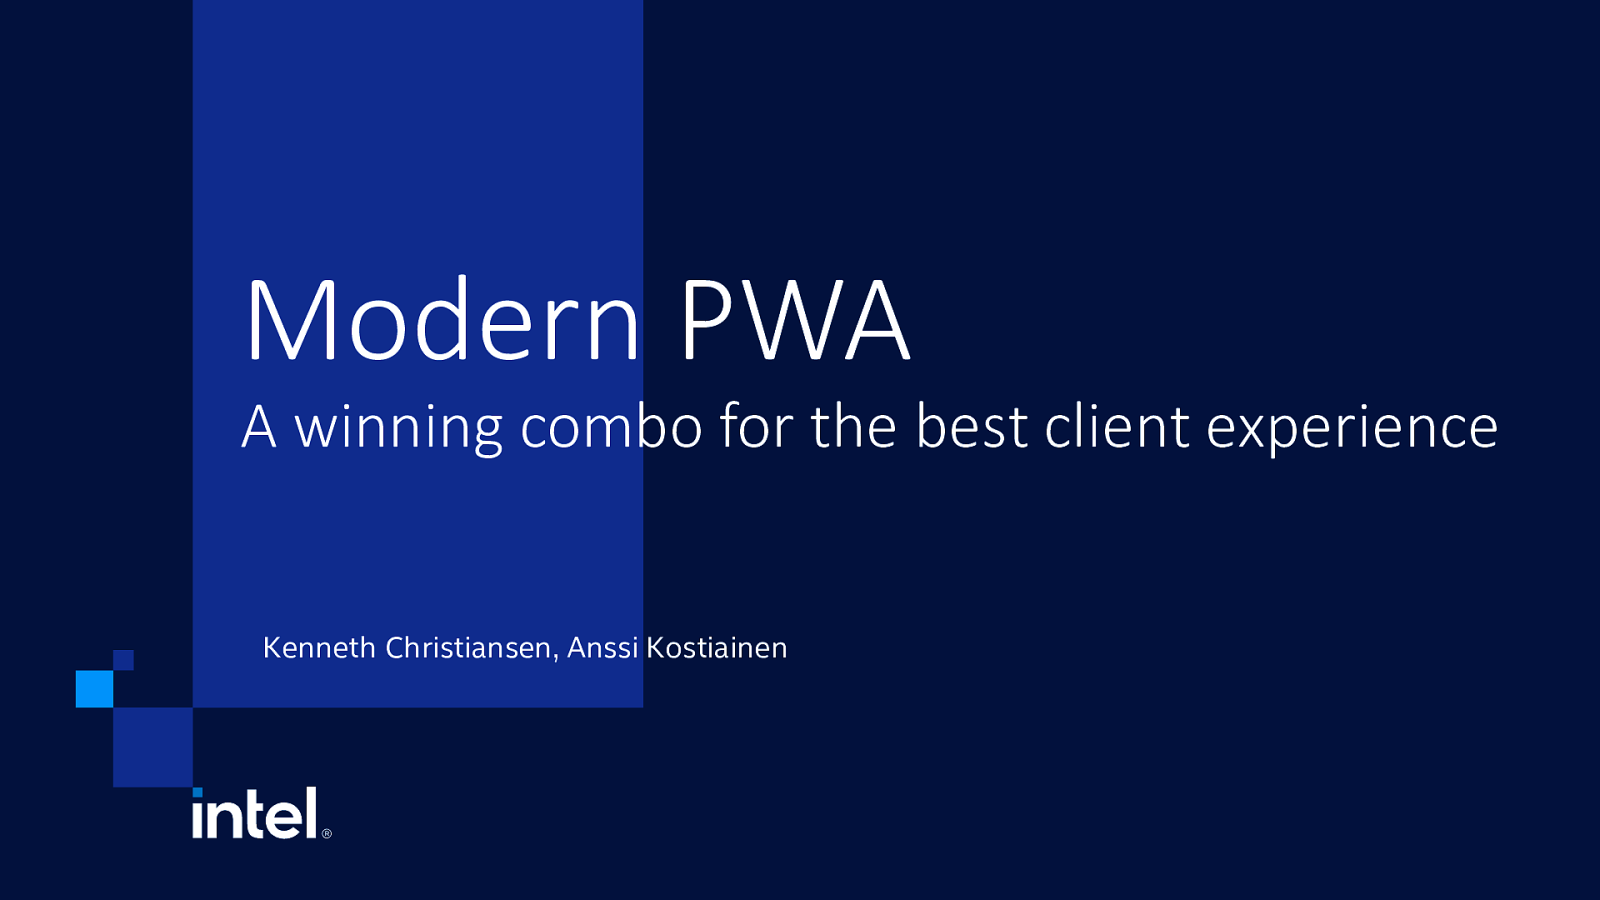 Modern PWA, a winning combo for the best client experience